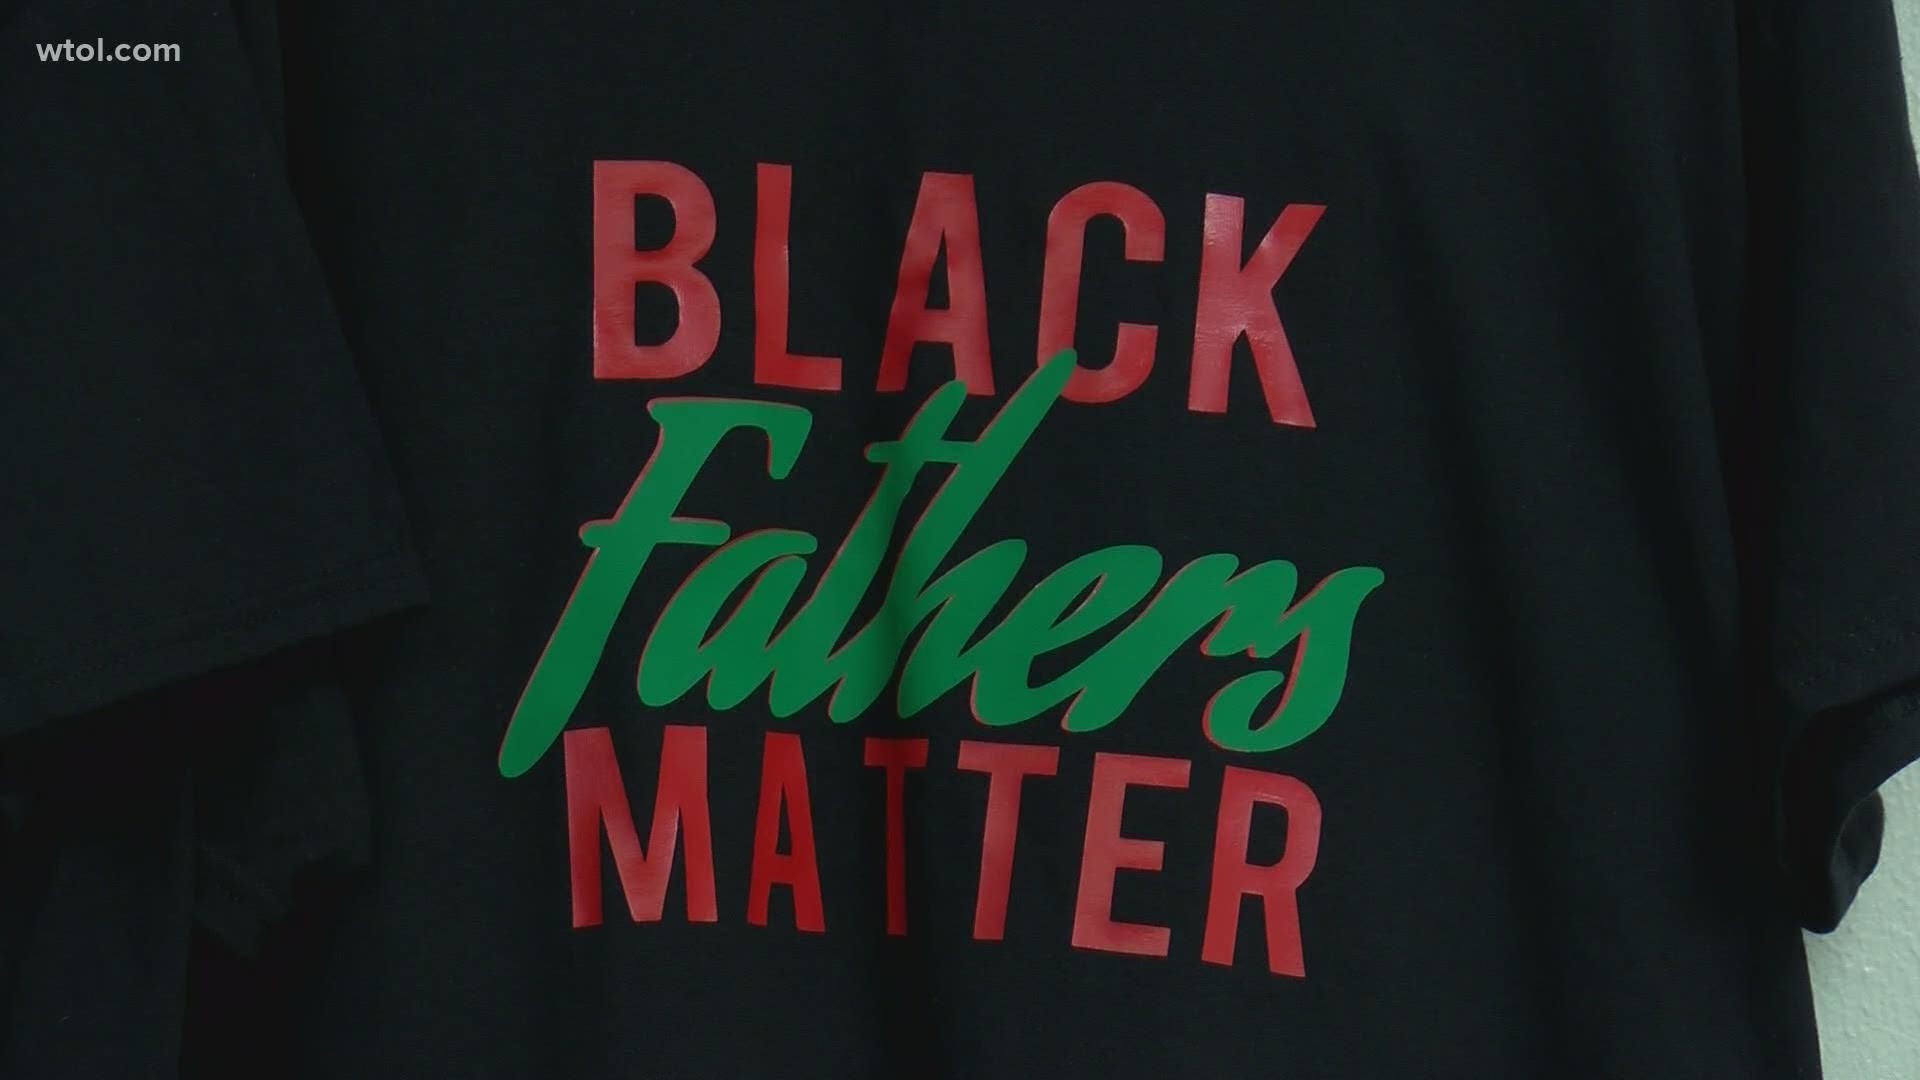 The event was held on Sunday for members of the community, with special emphasis honoring Black men and Black dads.